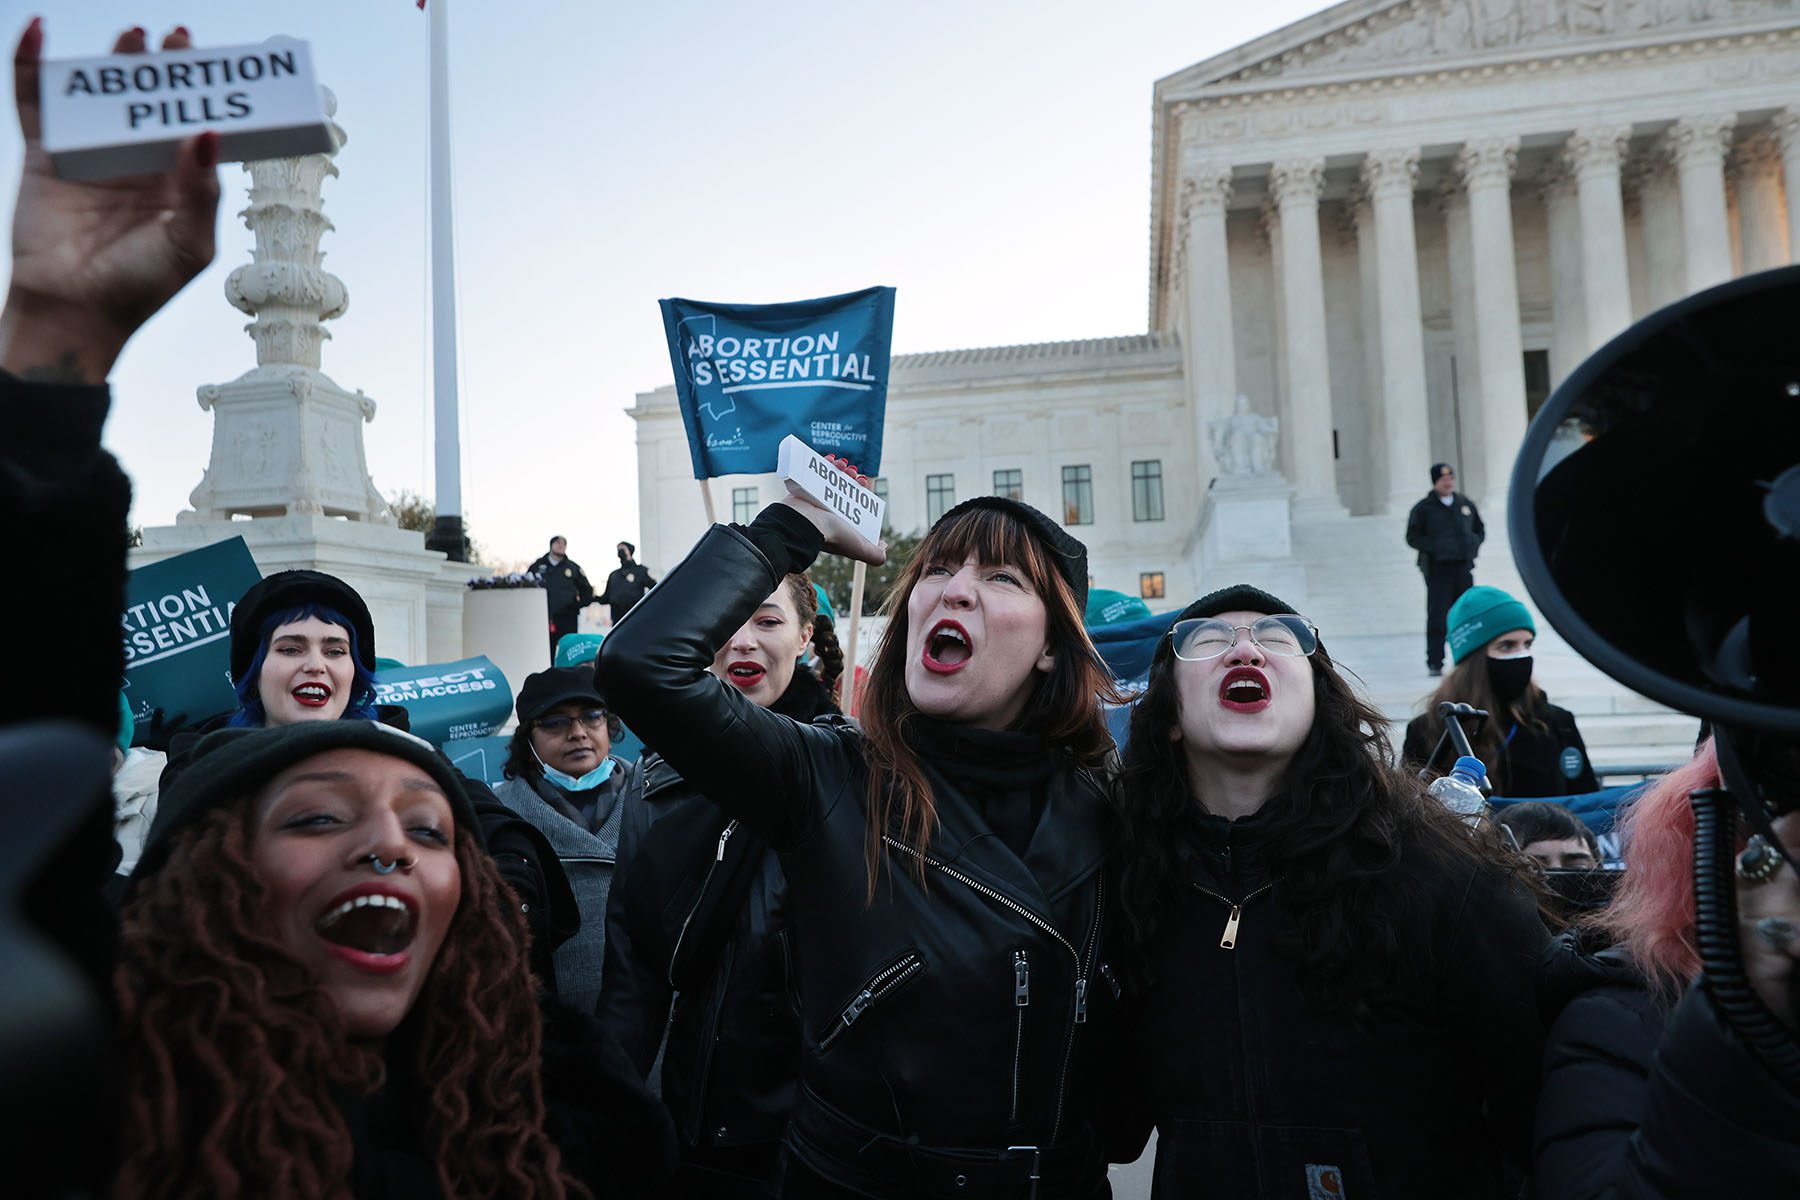 Abortion rights activists demonstrate in front of the U.S. Supreme Court.